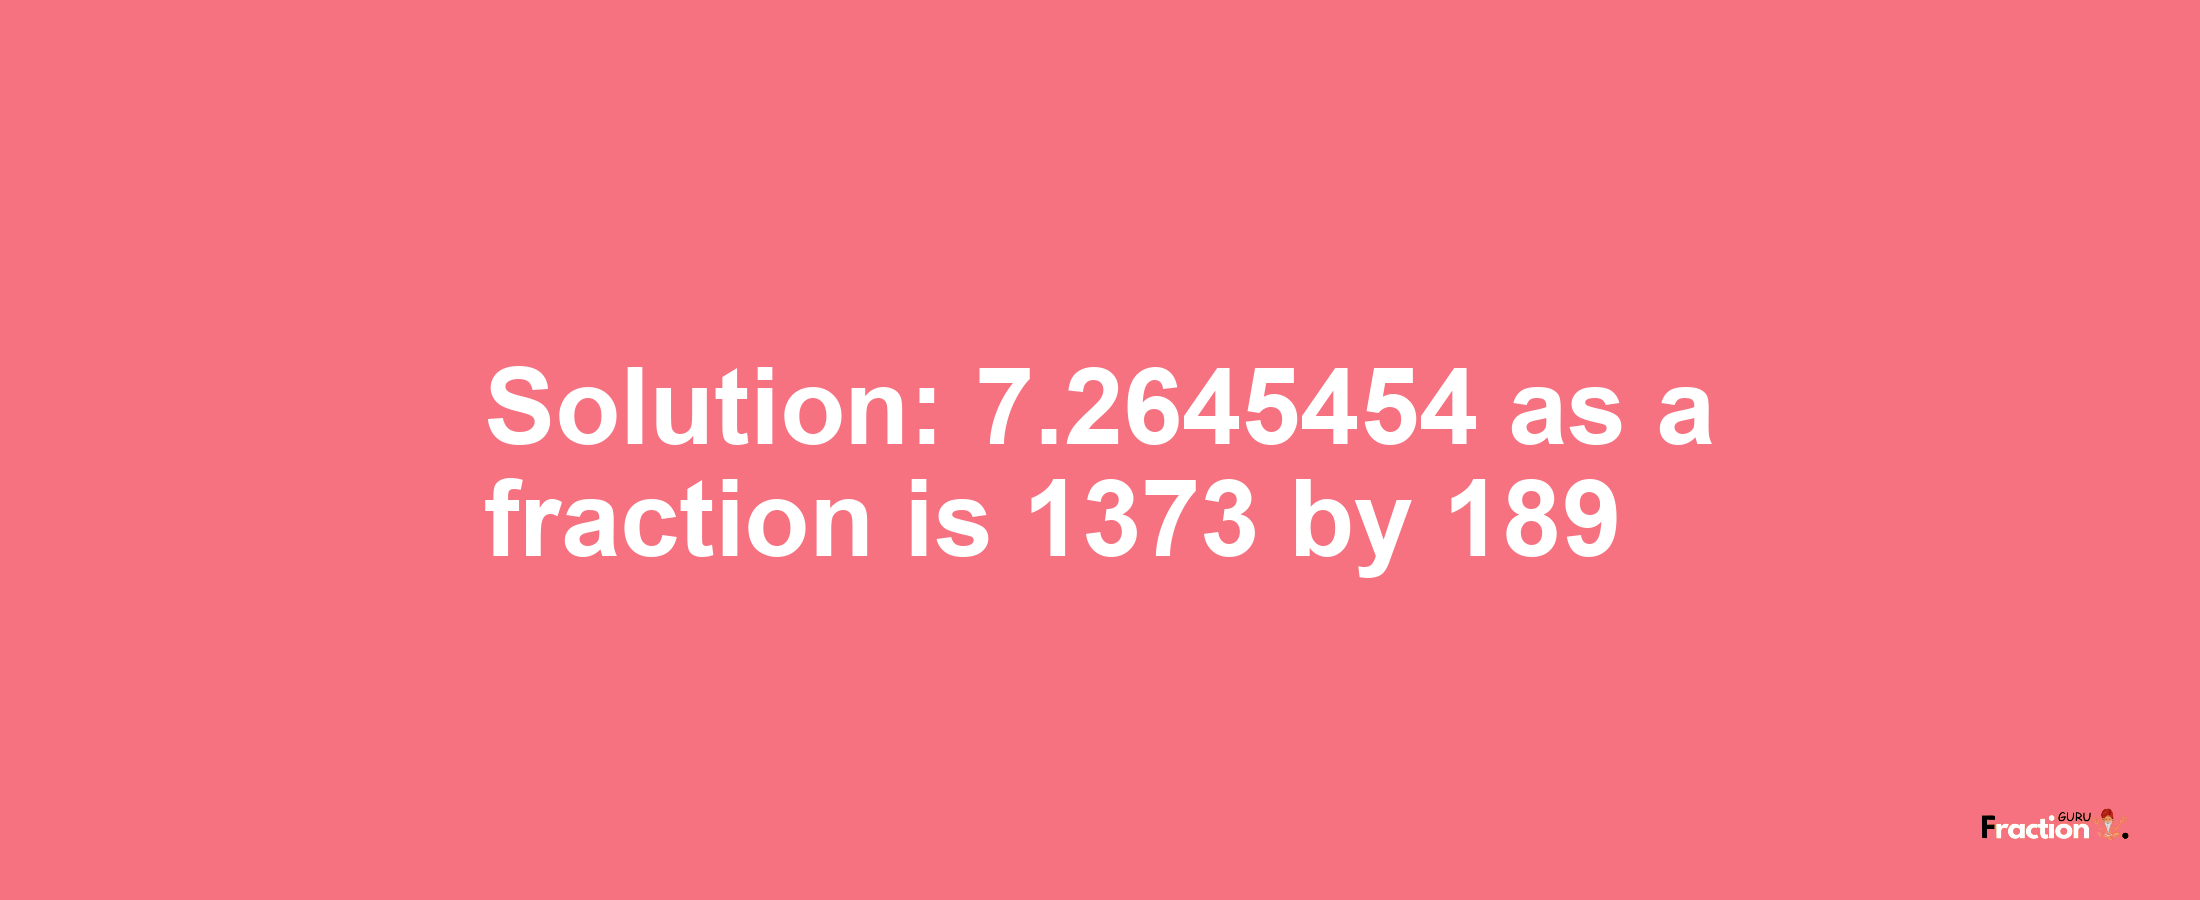 Solution:7.2645454 as a fraction is 1373/189